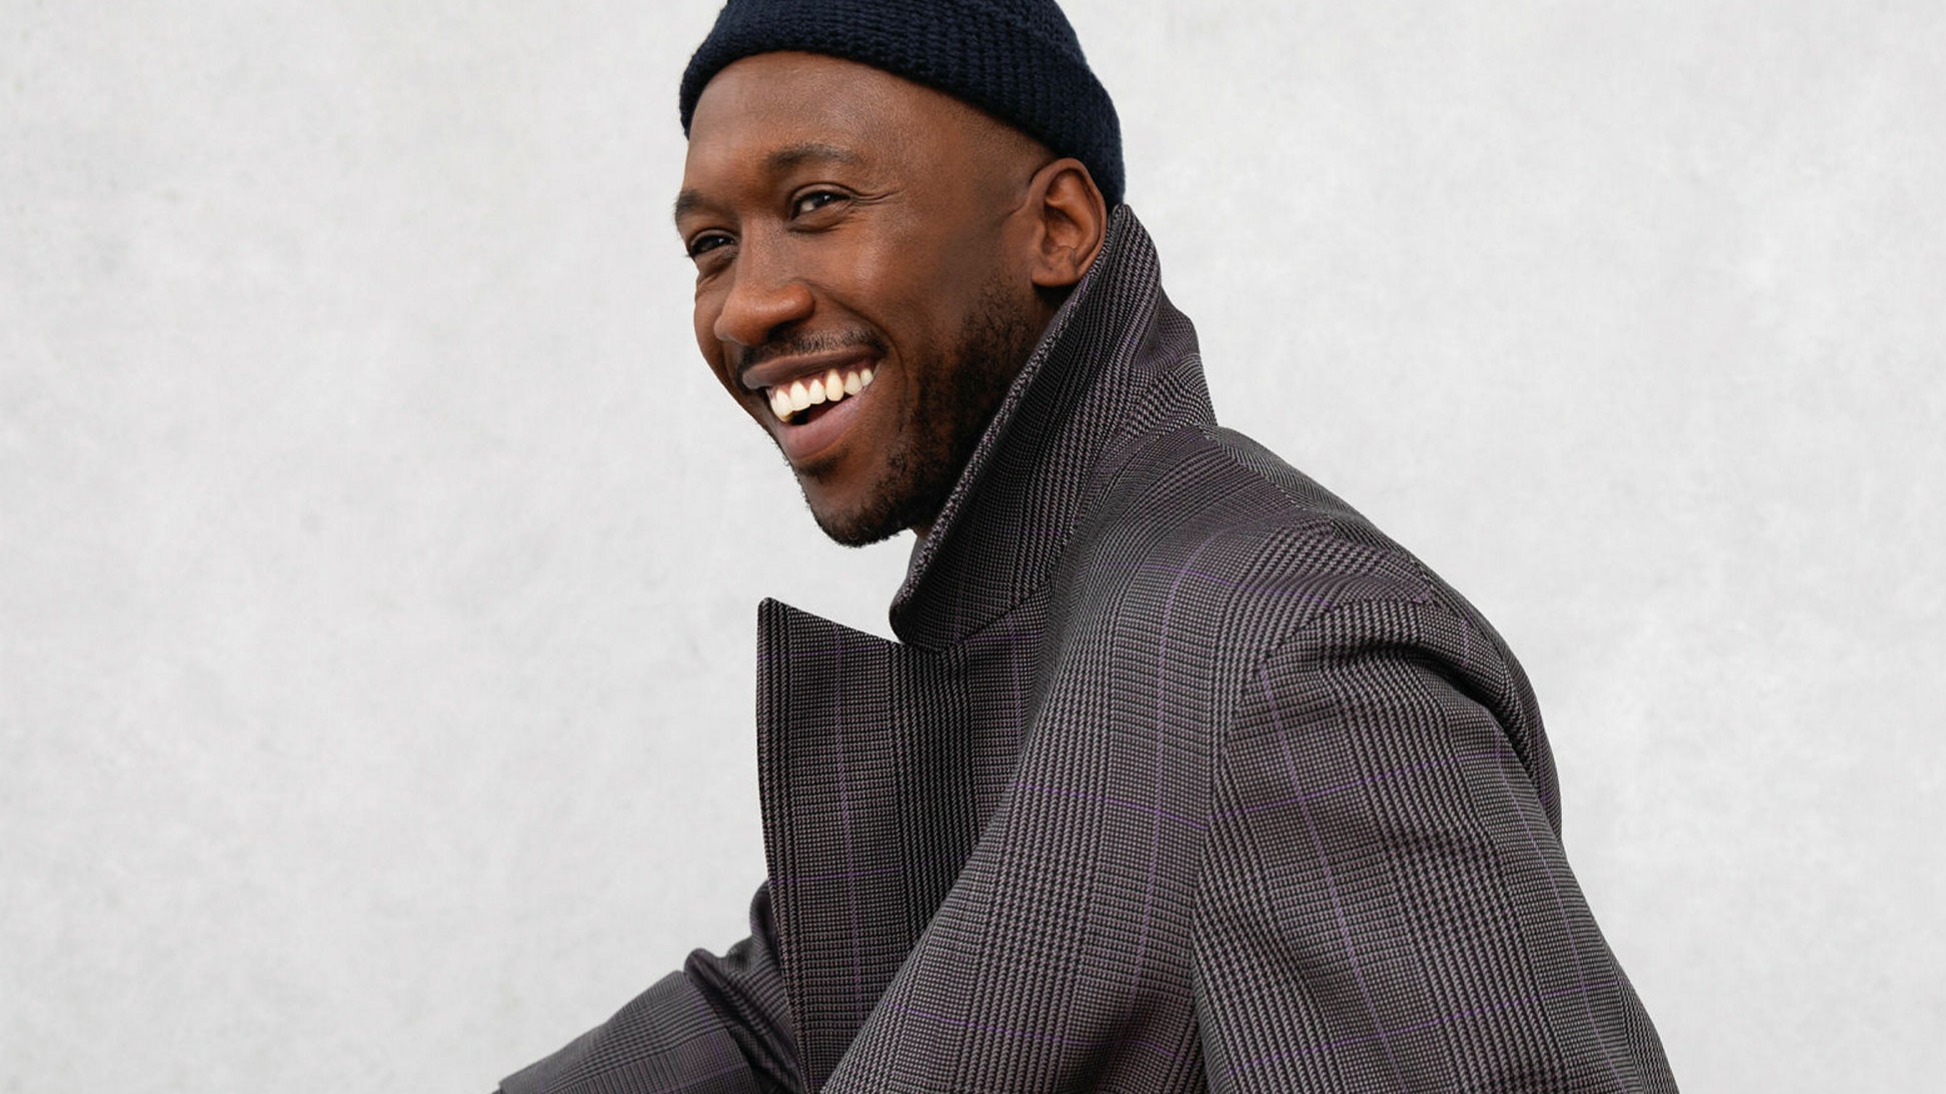 33 Facts about Mahershala Ali - Facts.net